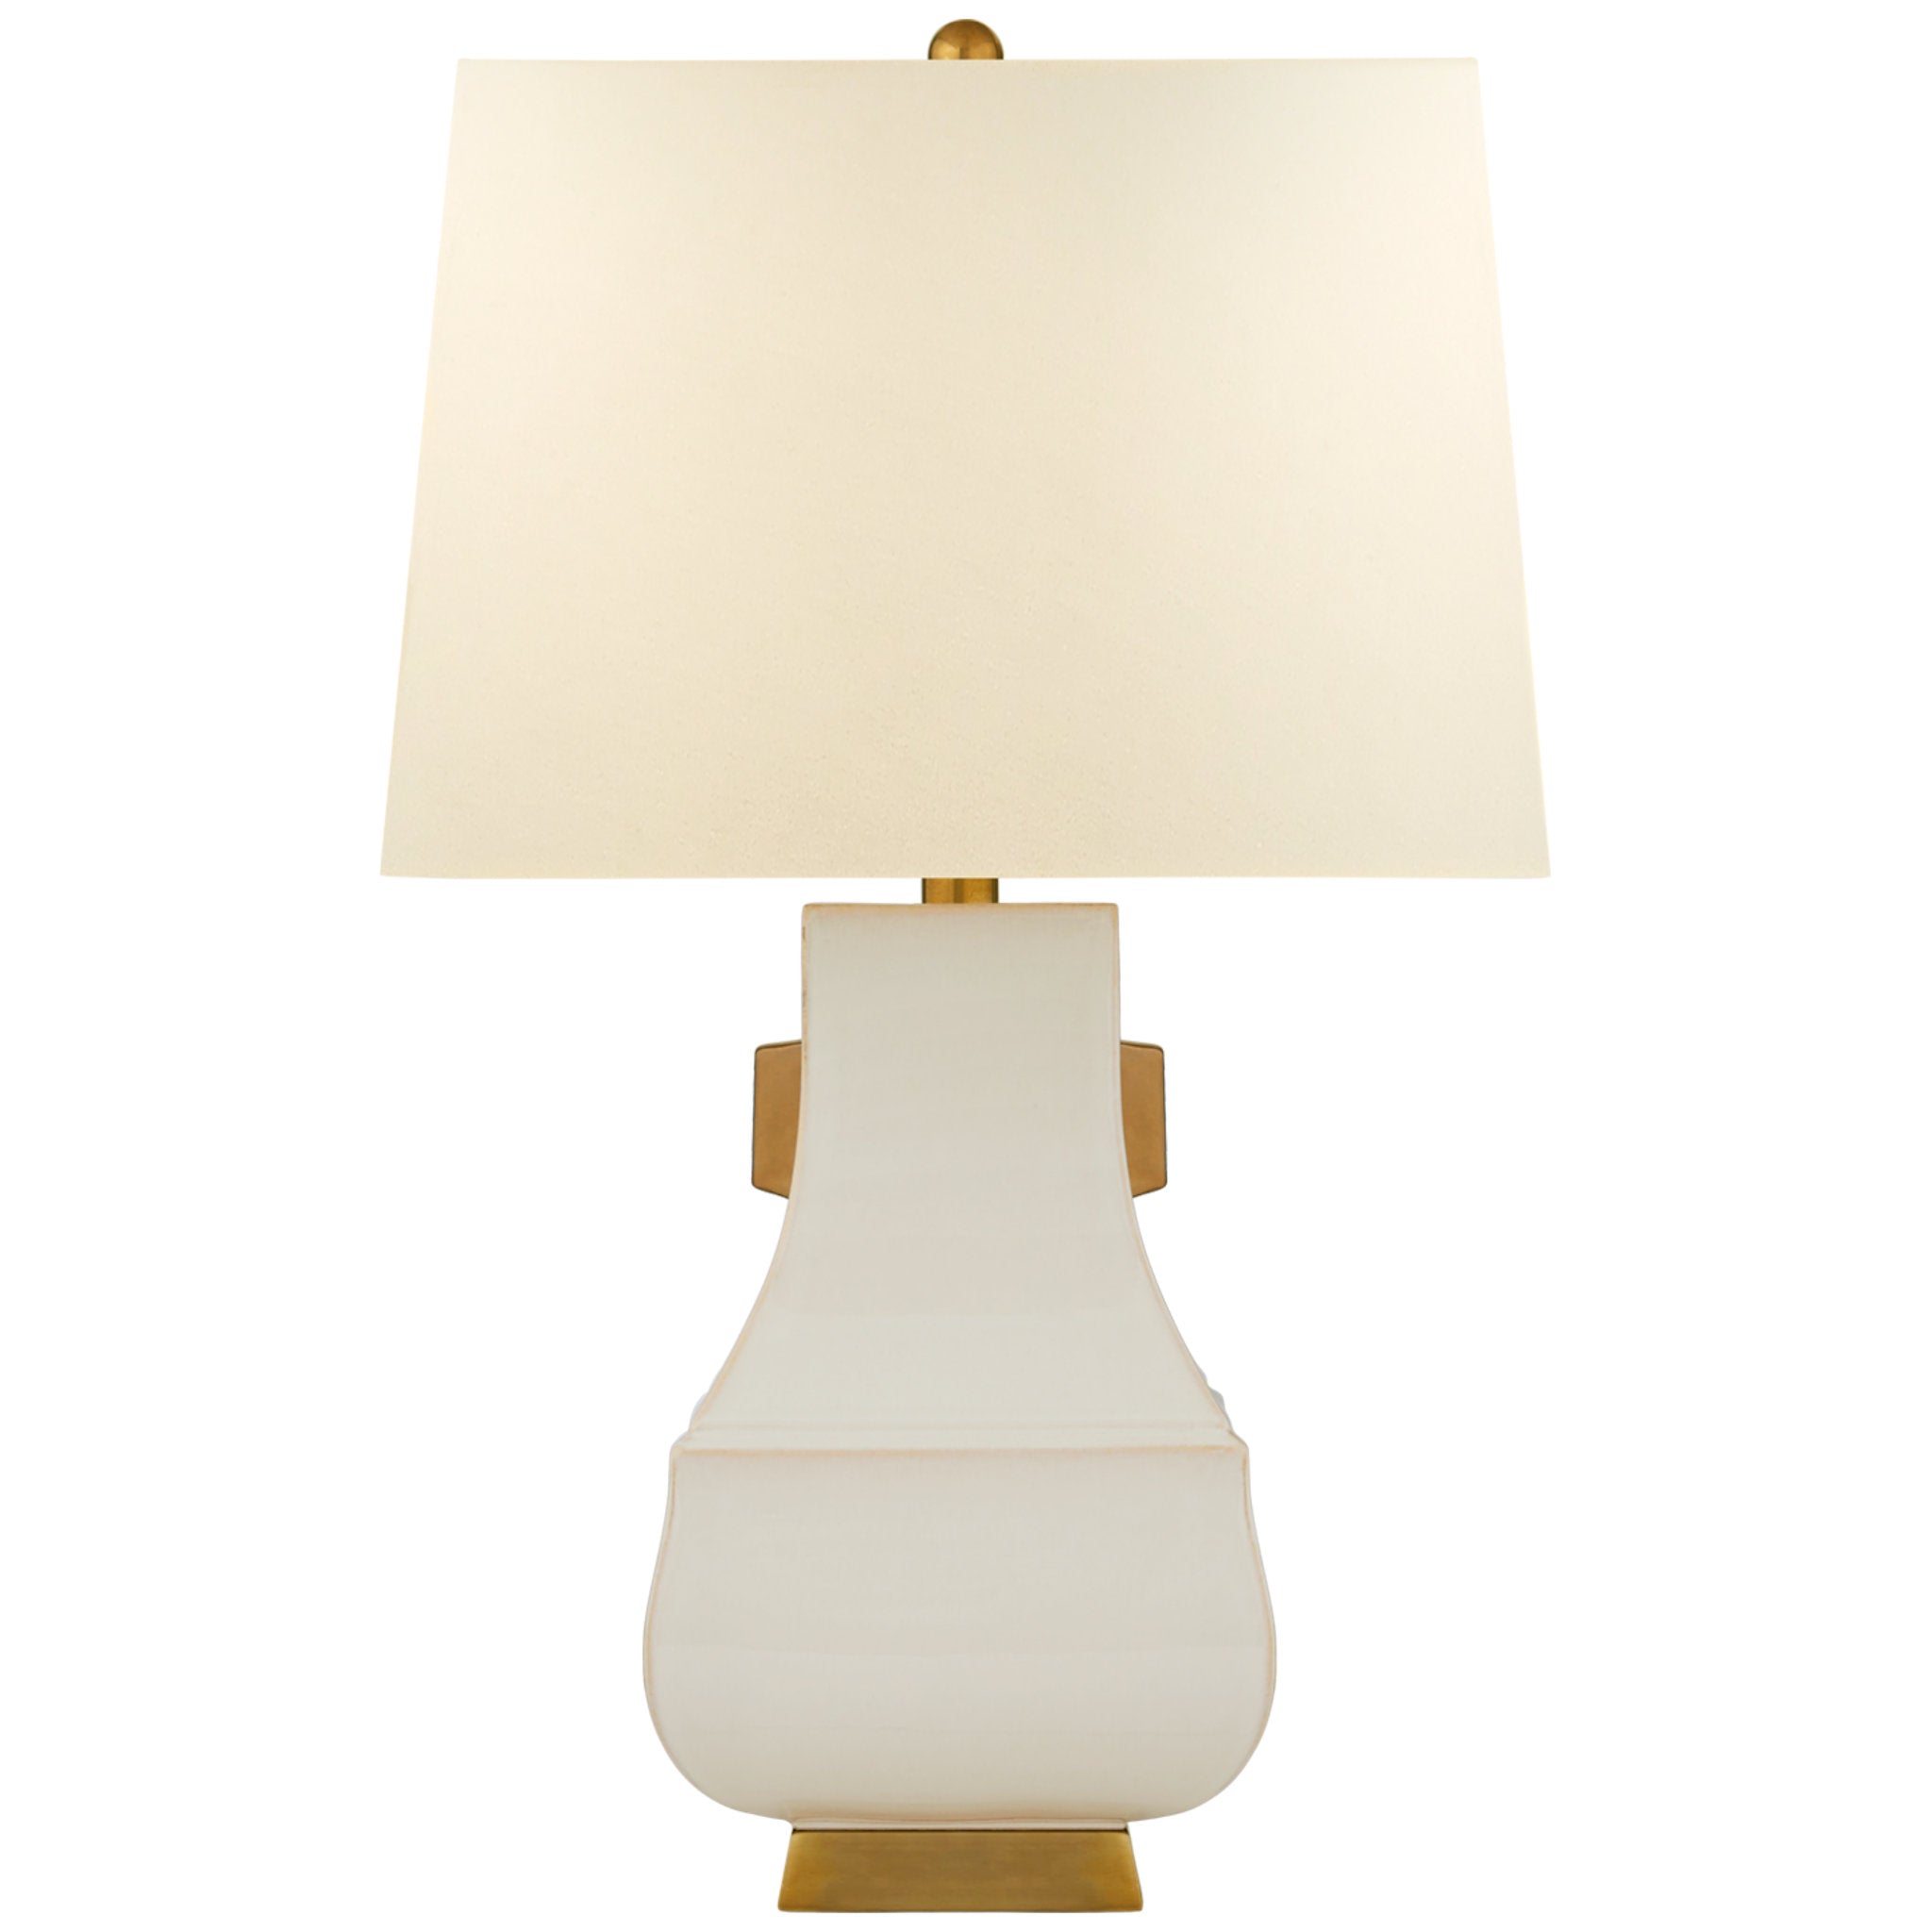 Chapman & Myers Kang Jug Large Table Lamp in Ivory and Burnt Gold Accent with Natural Percale Shade